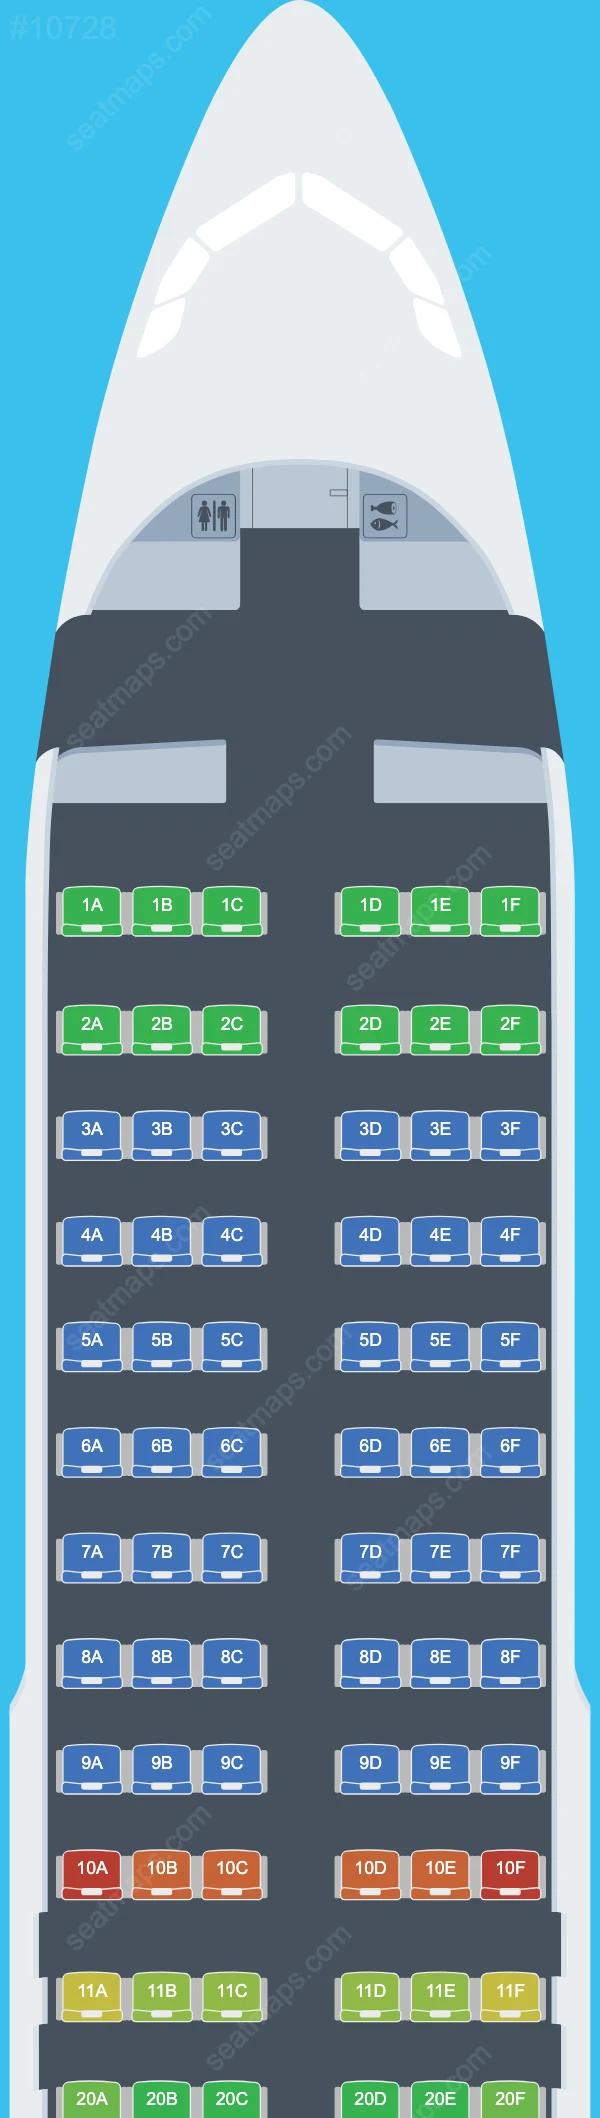 PLAY Airbus A320 Seat Maps A320-200neo